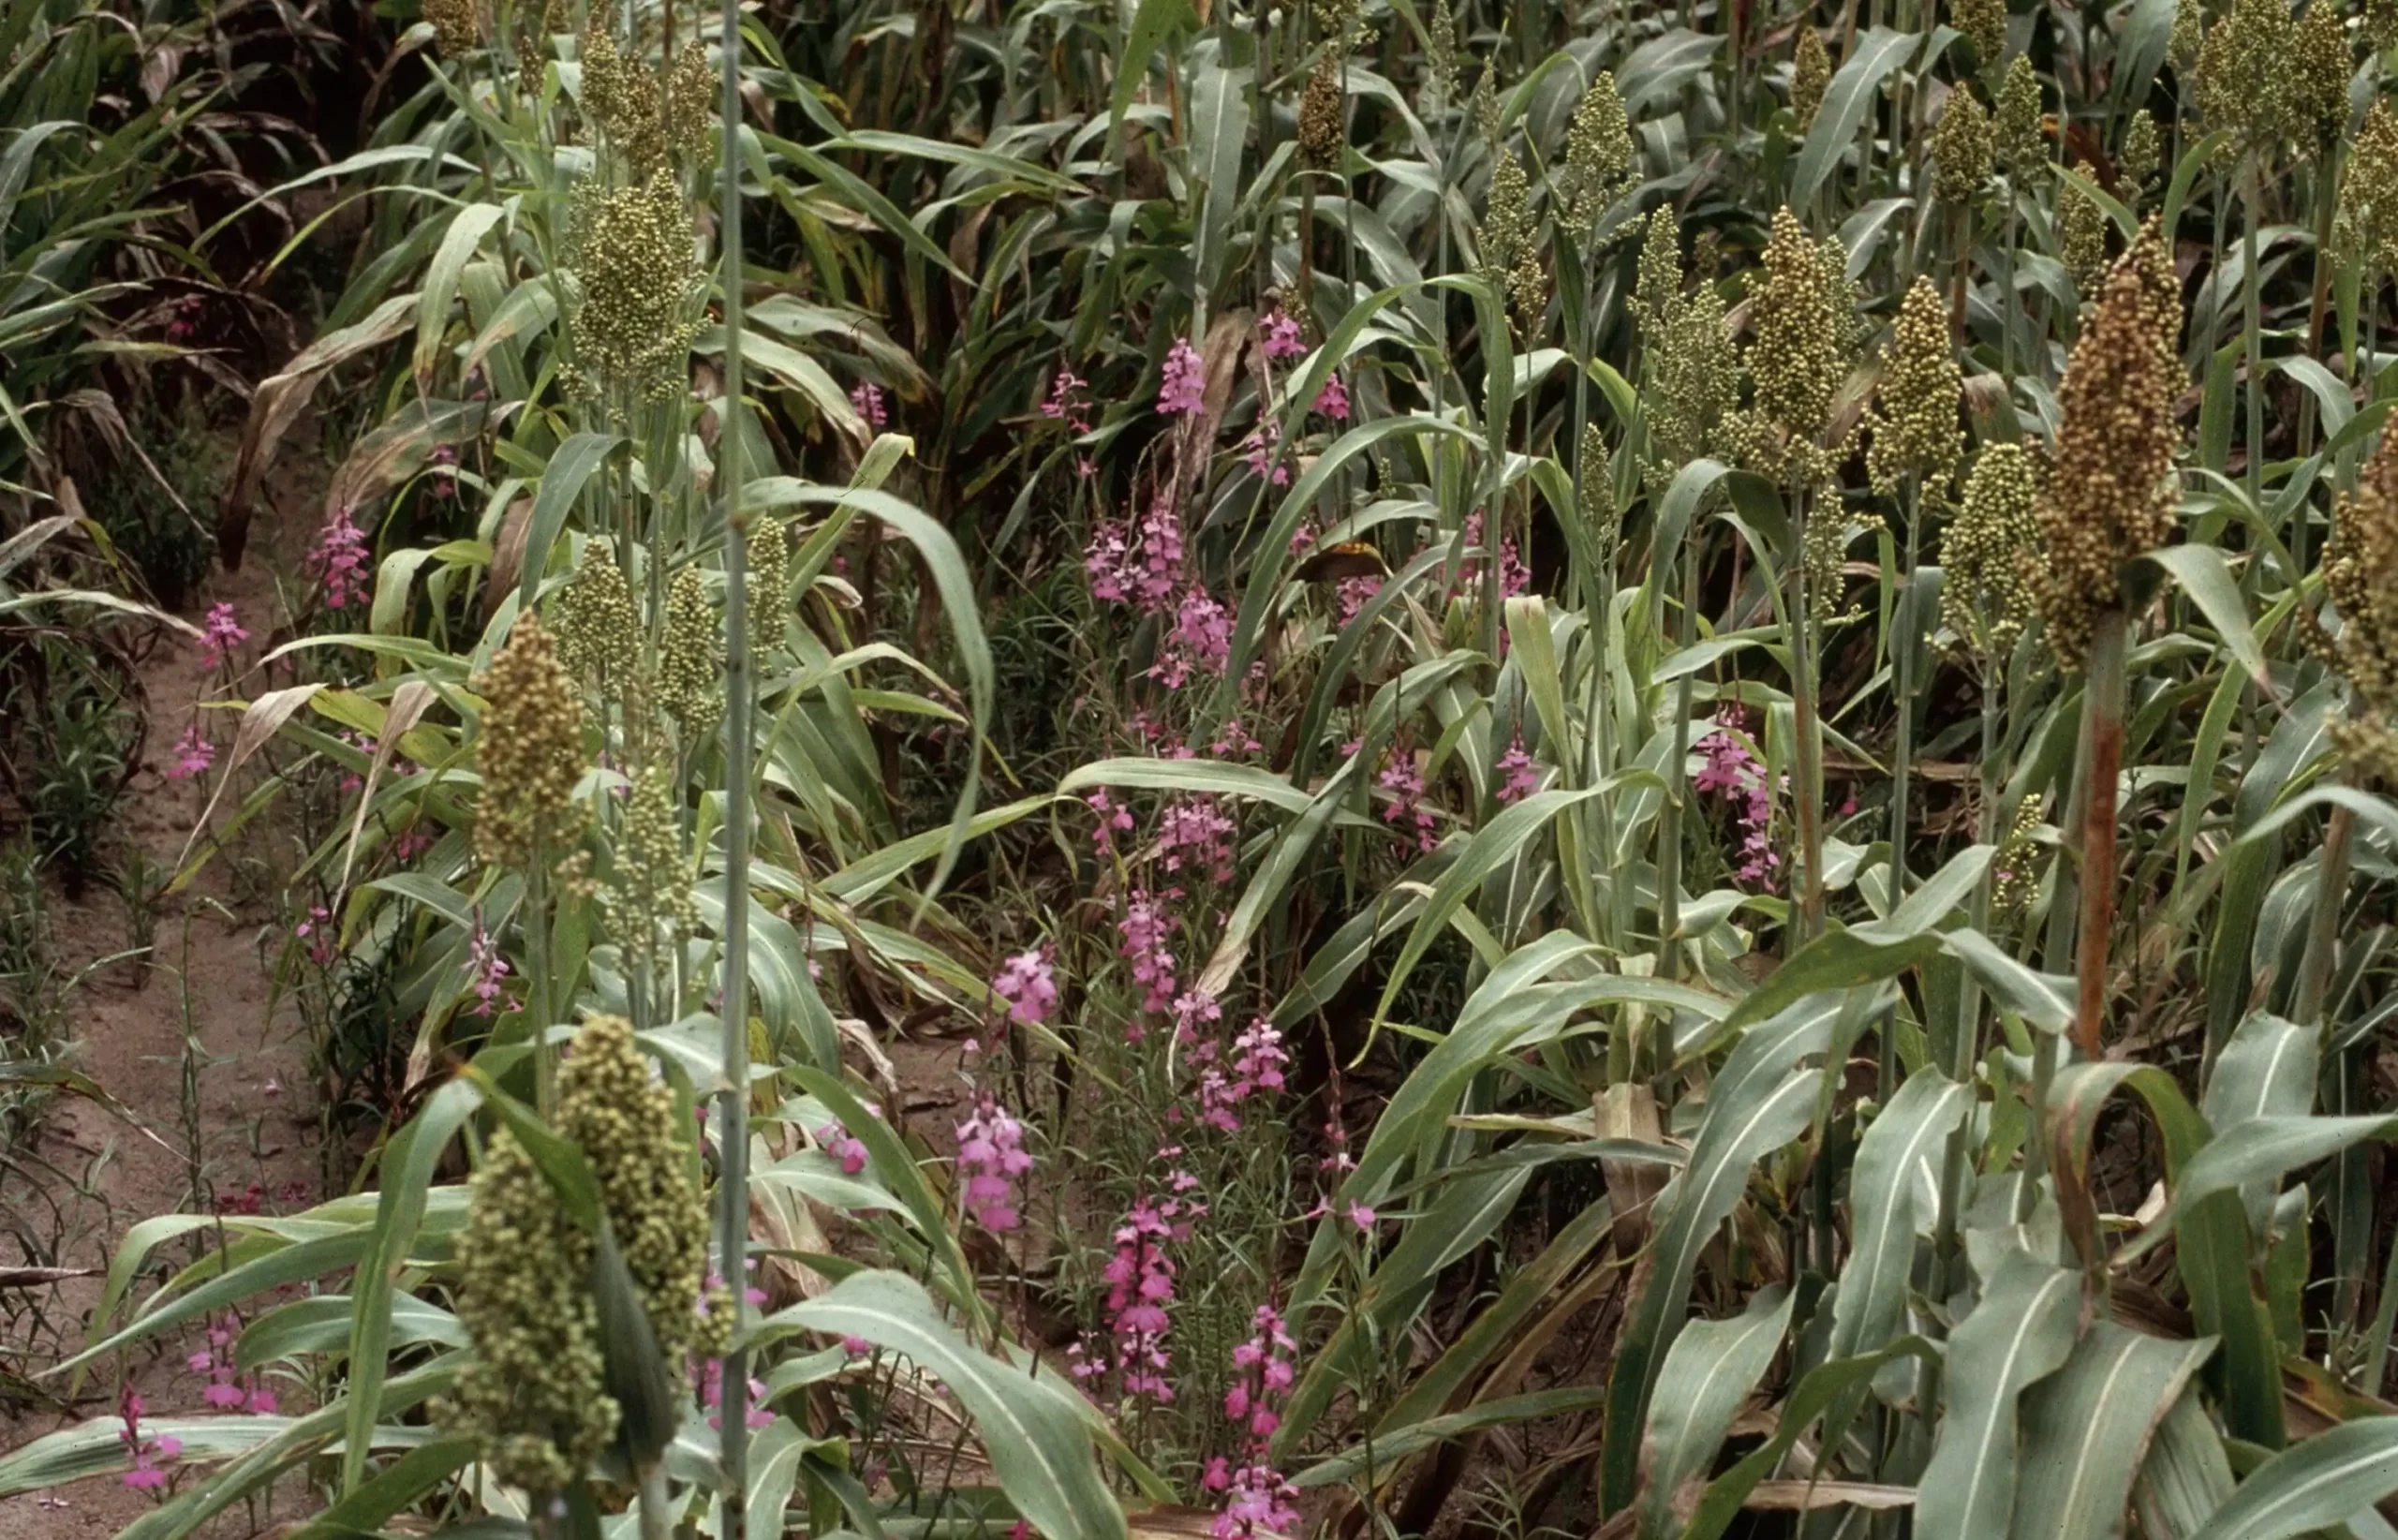 Image: Sorghum, or broomcorn, is a staple crop in sub-Saharan Africa, but approximately 20% of annual yields are lost due to infections with witchweed (Striga hermonthica), a parasitic plant that steals nutrients and water by latching onto the plant’s roots. Pictured here, rows sorghum with Striga (purple). Credit: USDA APHIS PPQ - Oxford, North Carolina, USDA APHIS PPQ, Bugwood.org / Wikimedia.